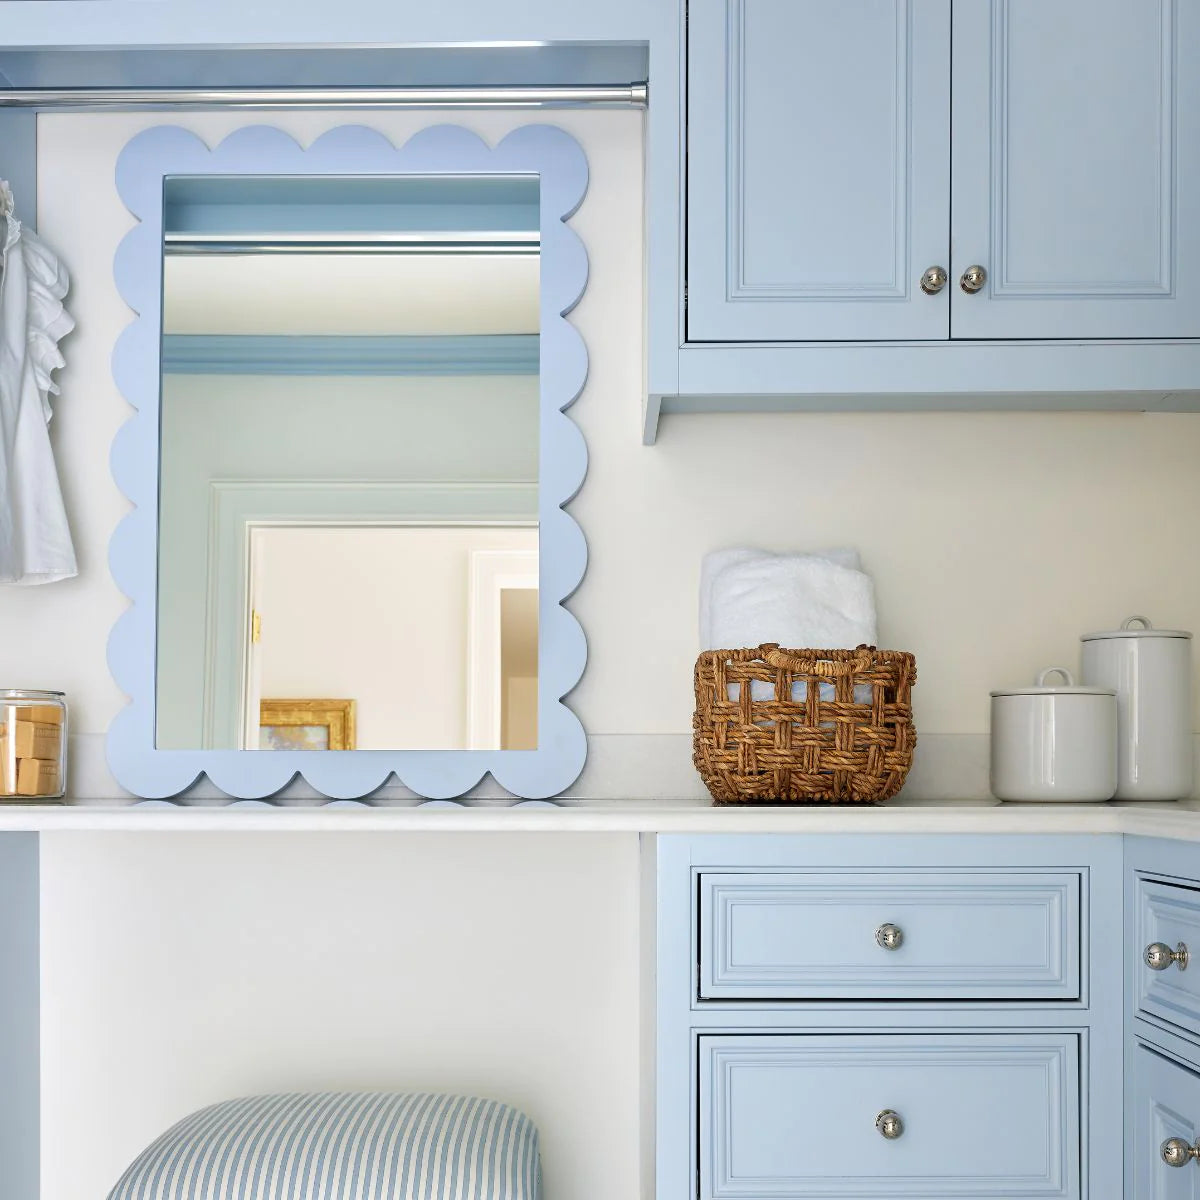 Cherie Wall Mirror in Bluebonnet by Caitlin Wilson for Cooper Classics